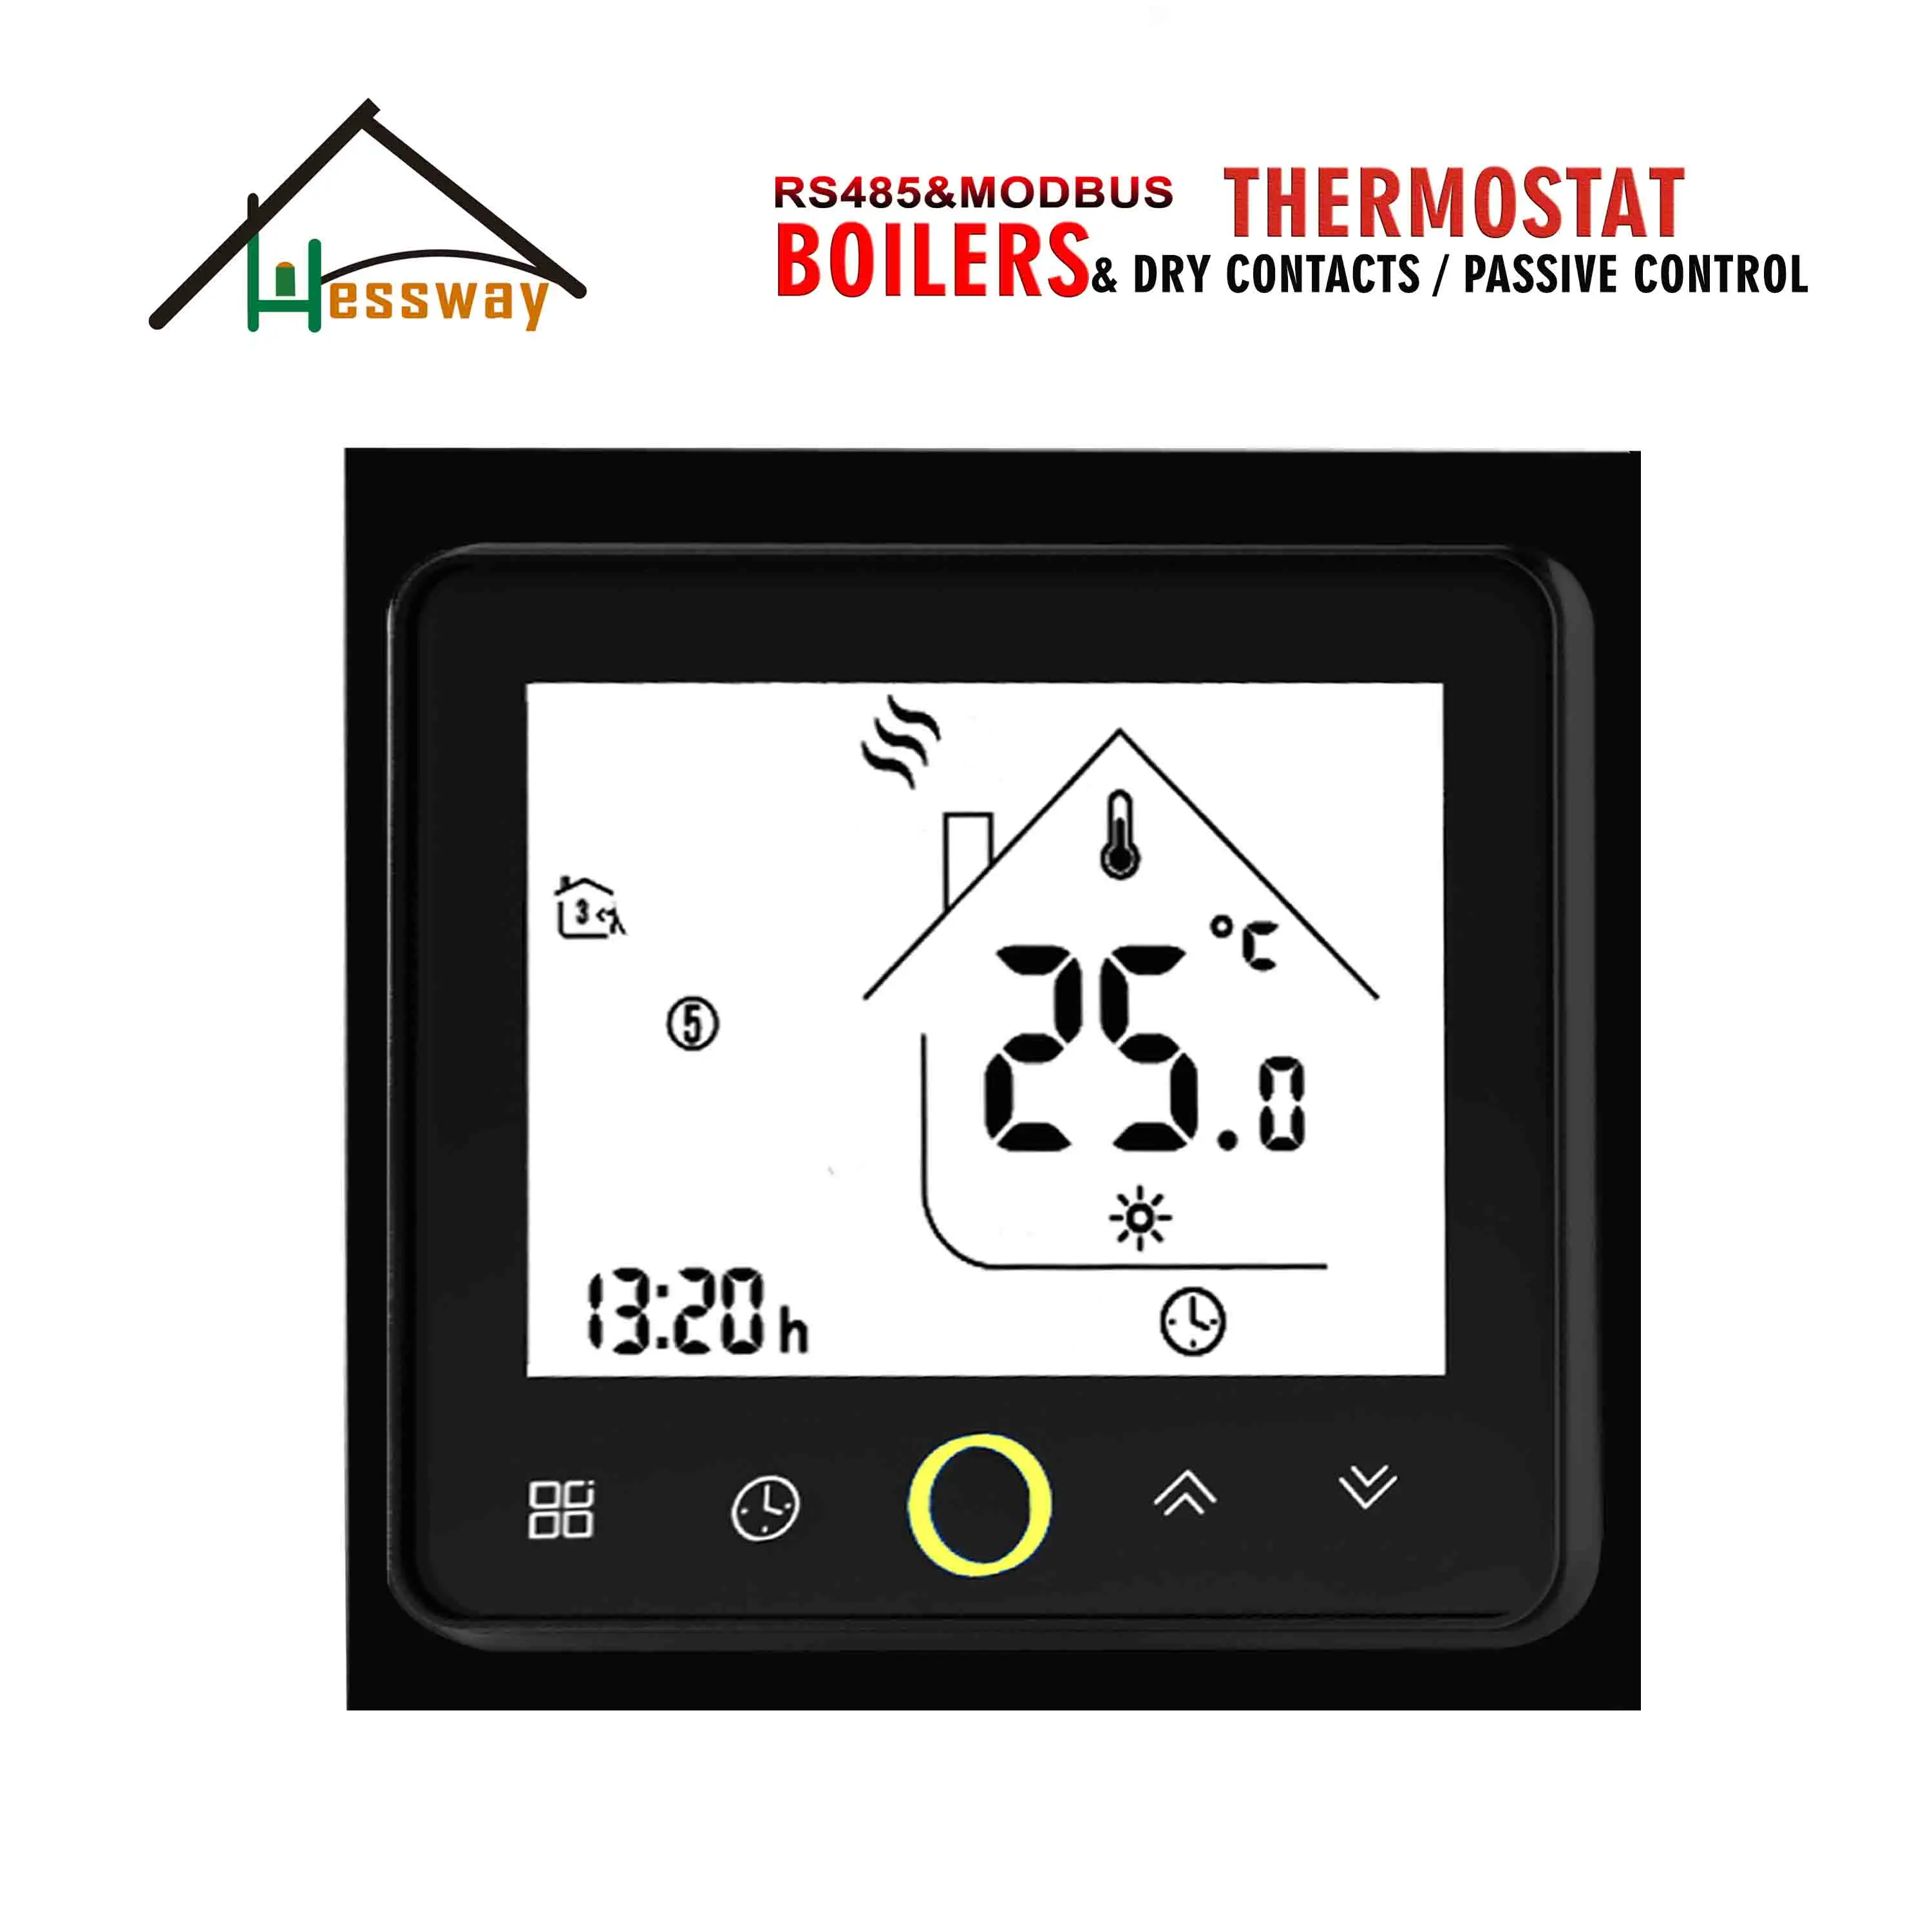 HESSWAY Dry Contact RS485&modbus remote control Thermostat for water boiler On&Off hessway programmable remote pc control rs485 modbus thermostat for gasboiler dry contact on